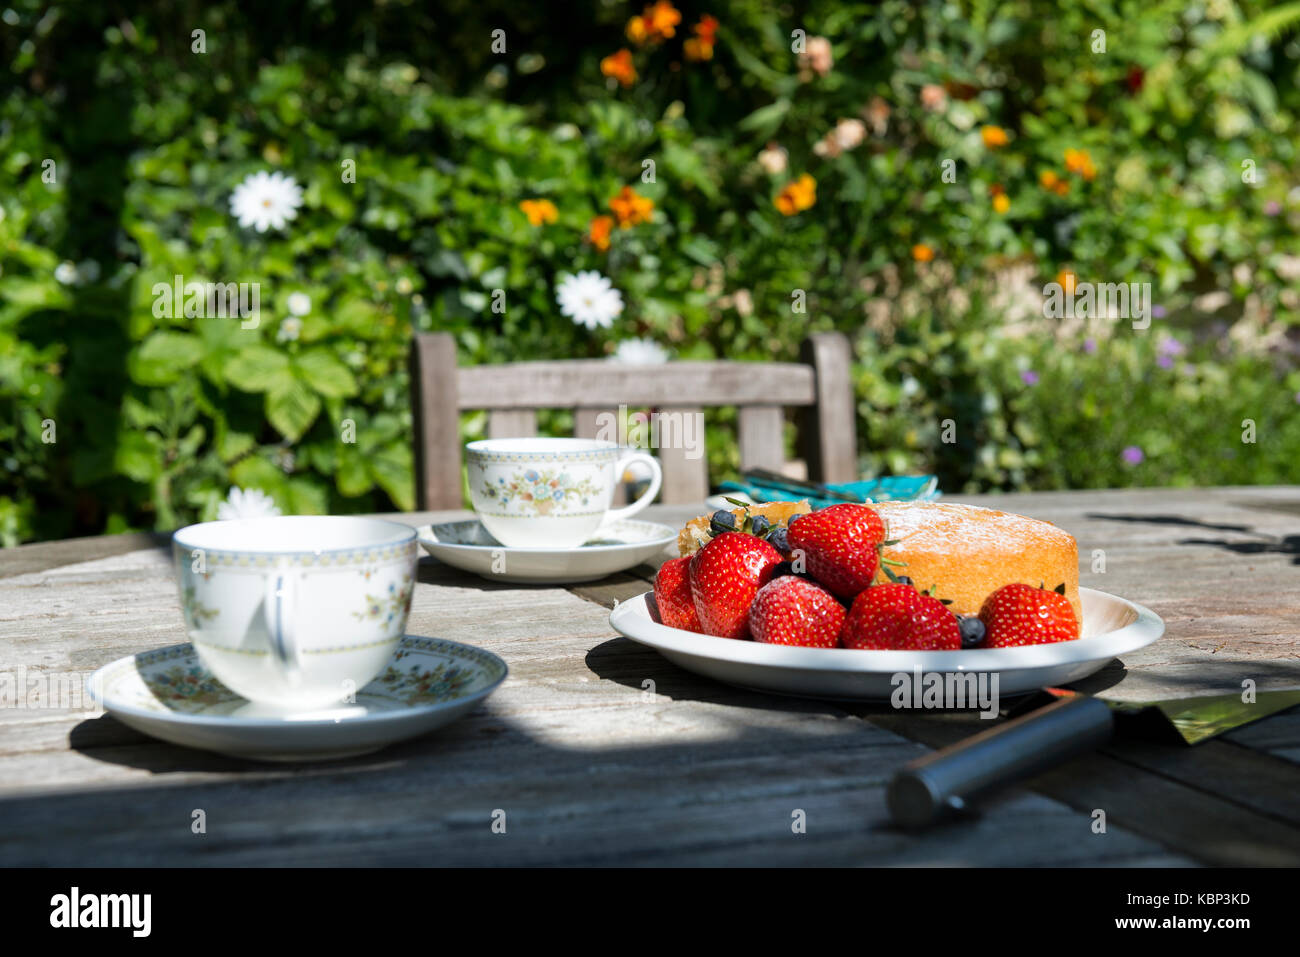 Strawberries and other summer fruits and freshly baked cake on a garden table with two china cups and saucers in a sunny summer garden in Devon. Stock Photo